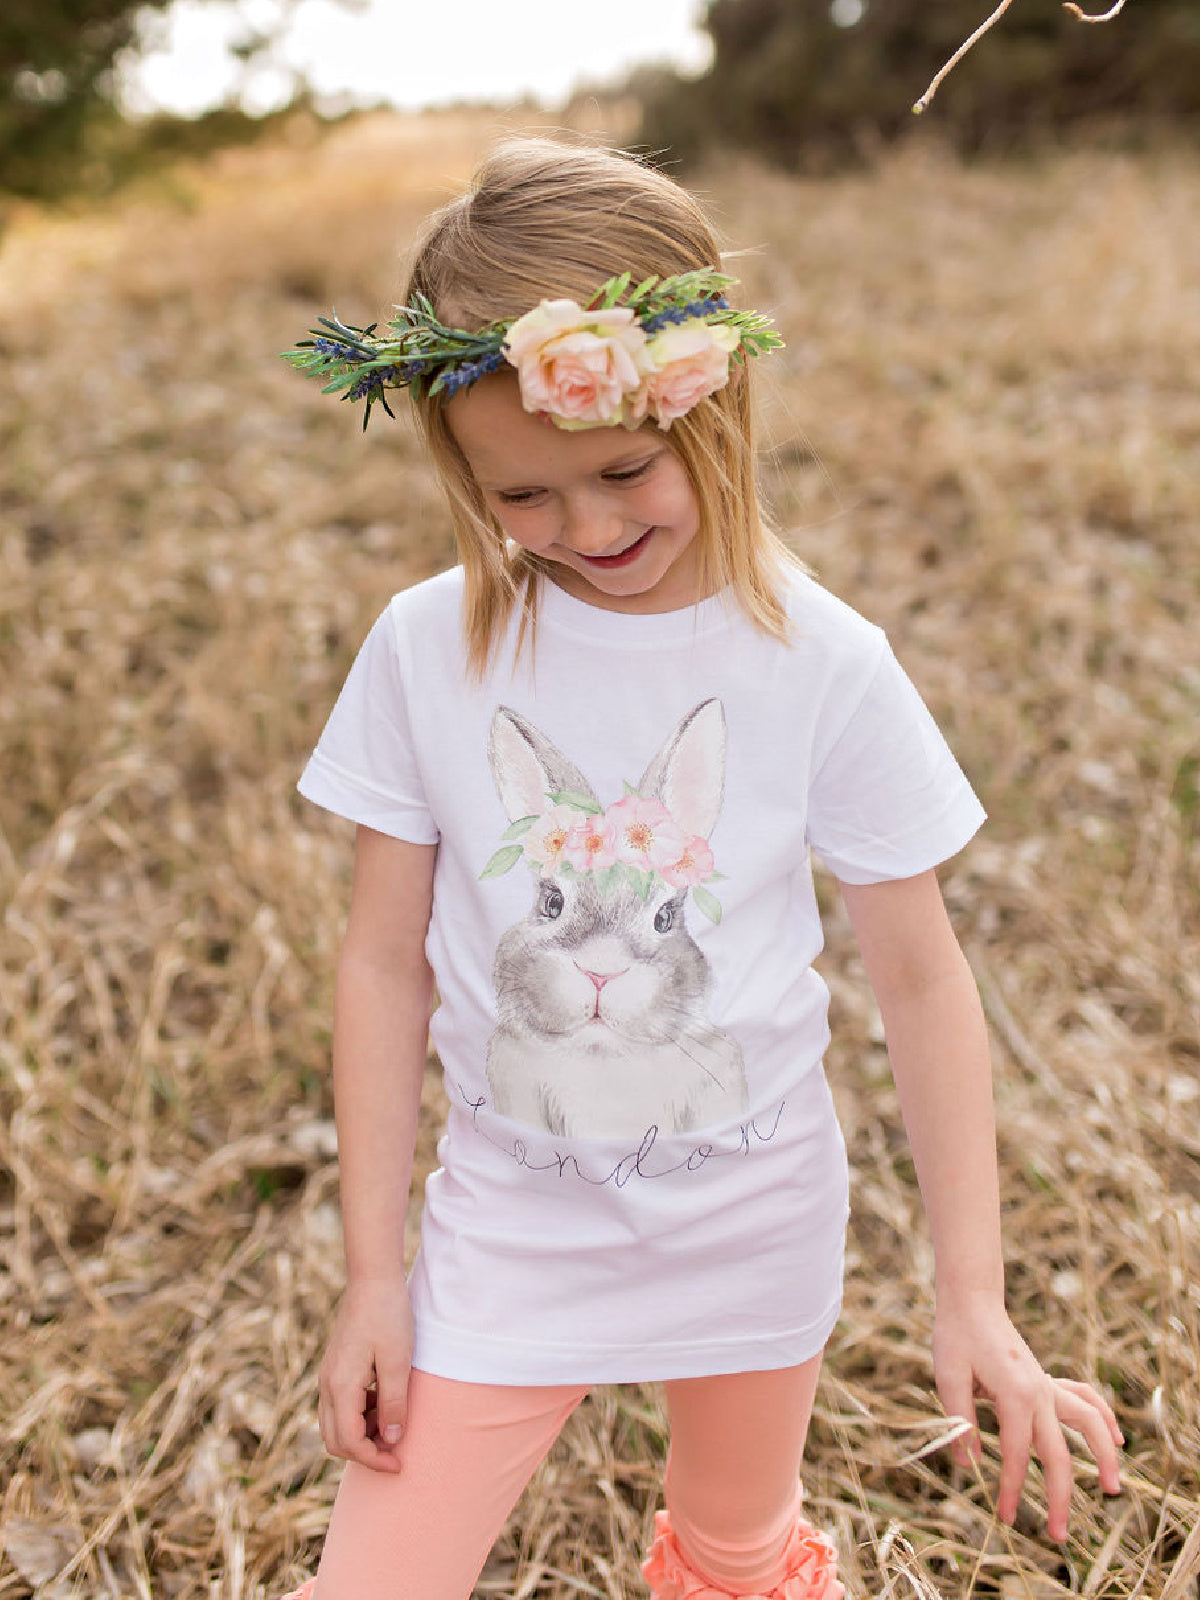 Girls Flower Crown Bunny Personalized Shirt Pink